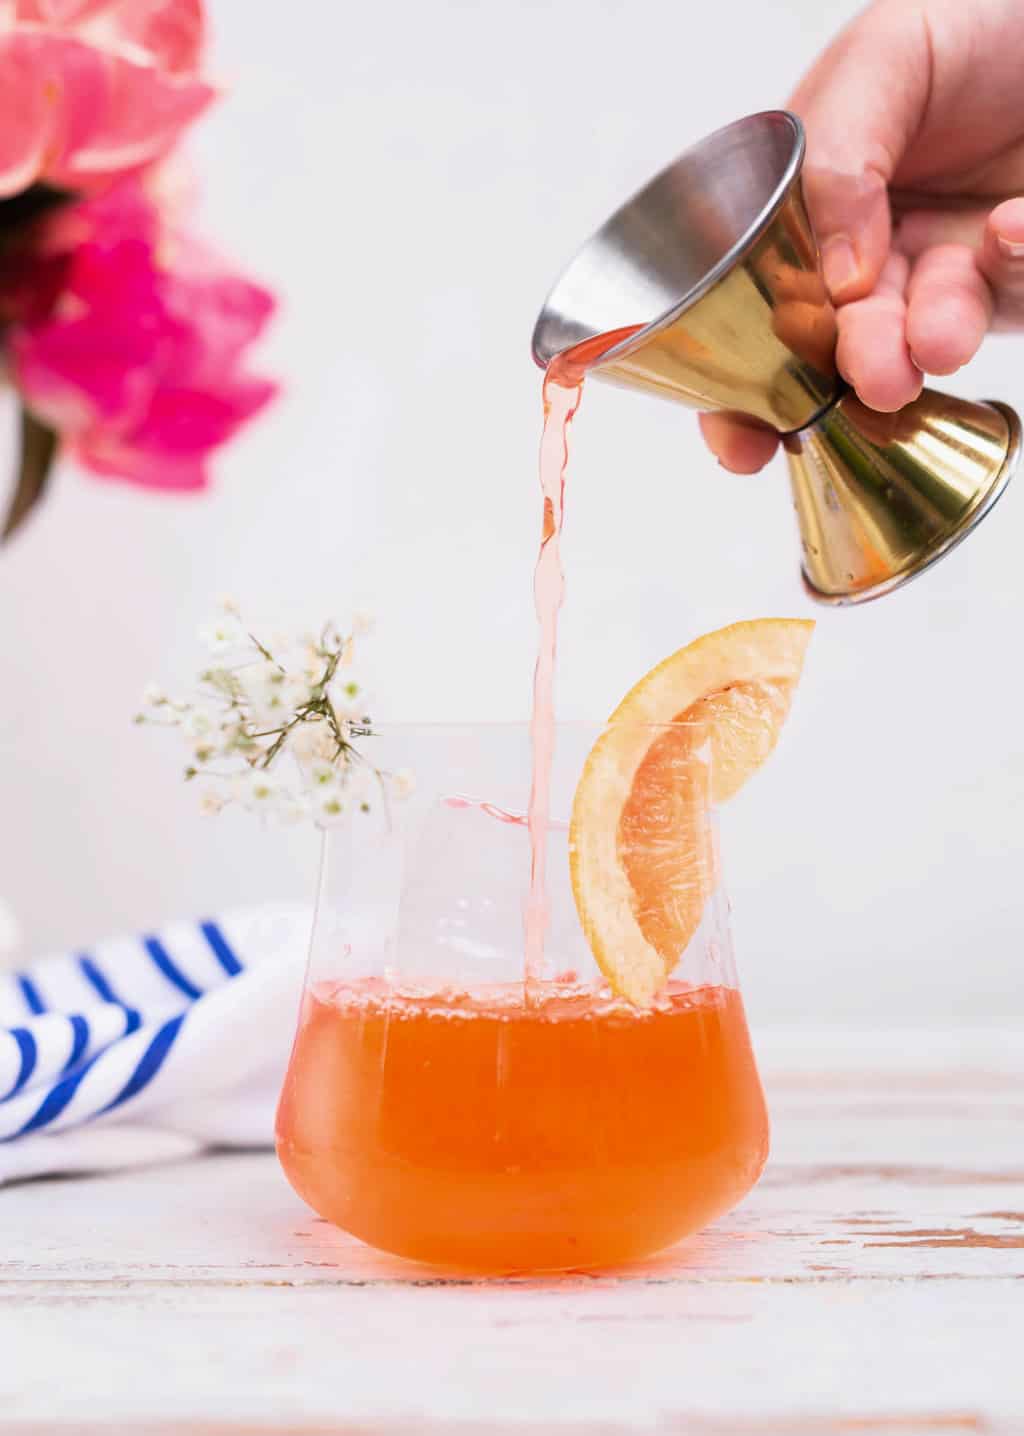 photo of How To Make An Elderflower Aperol Spritz Cocktail by top Houston lifestyle blogger Ashley Rose of Sugar & Cloth